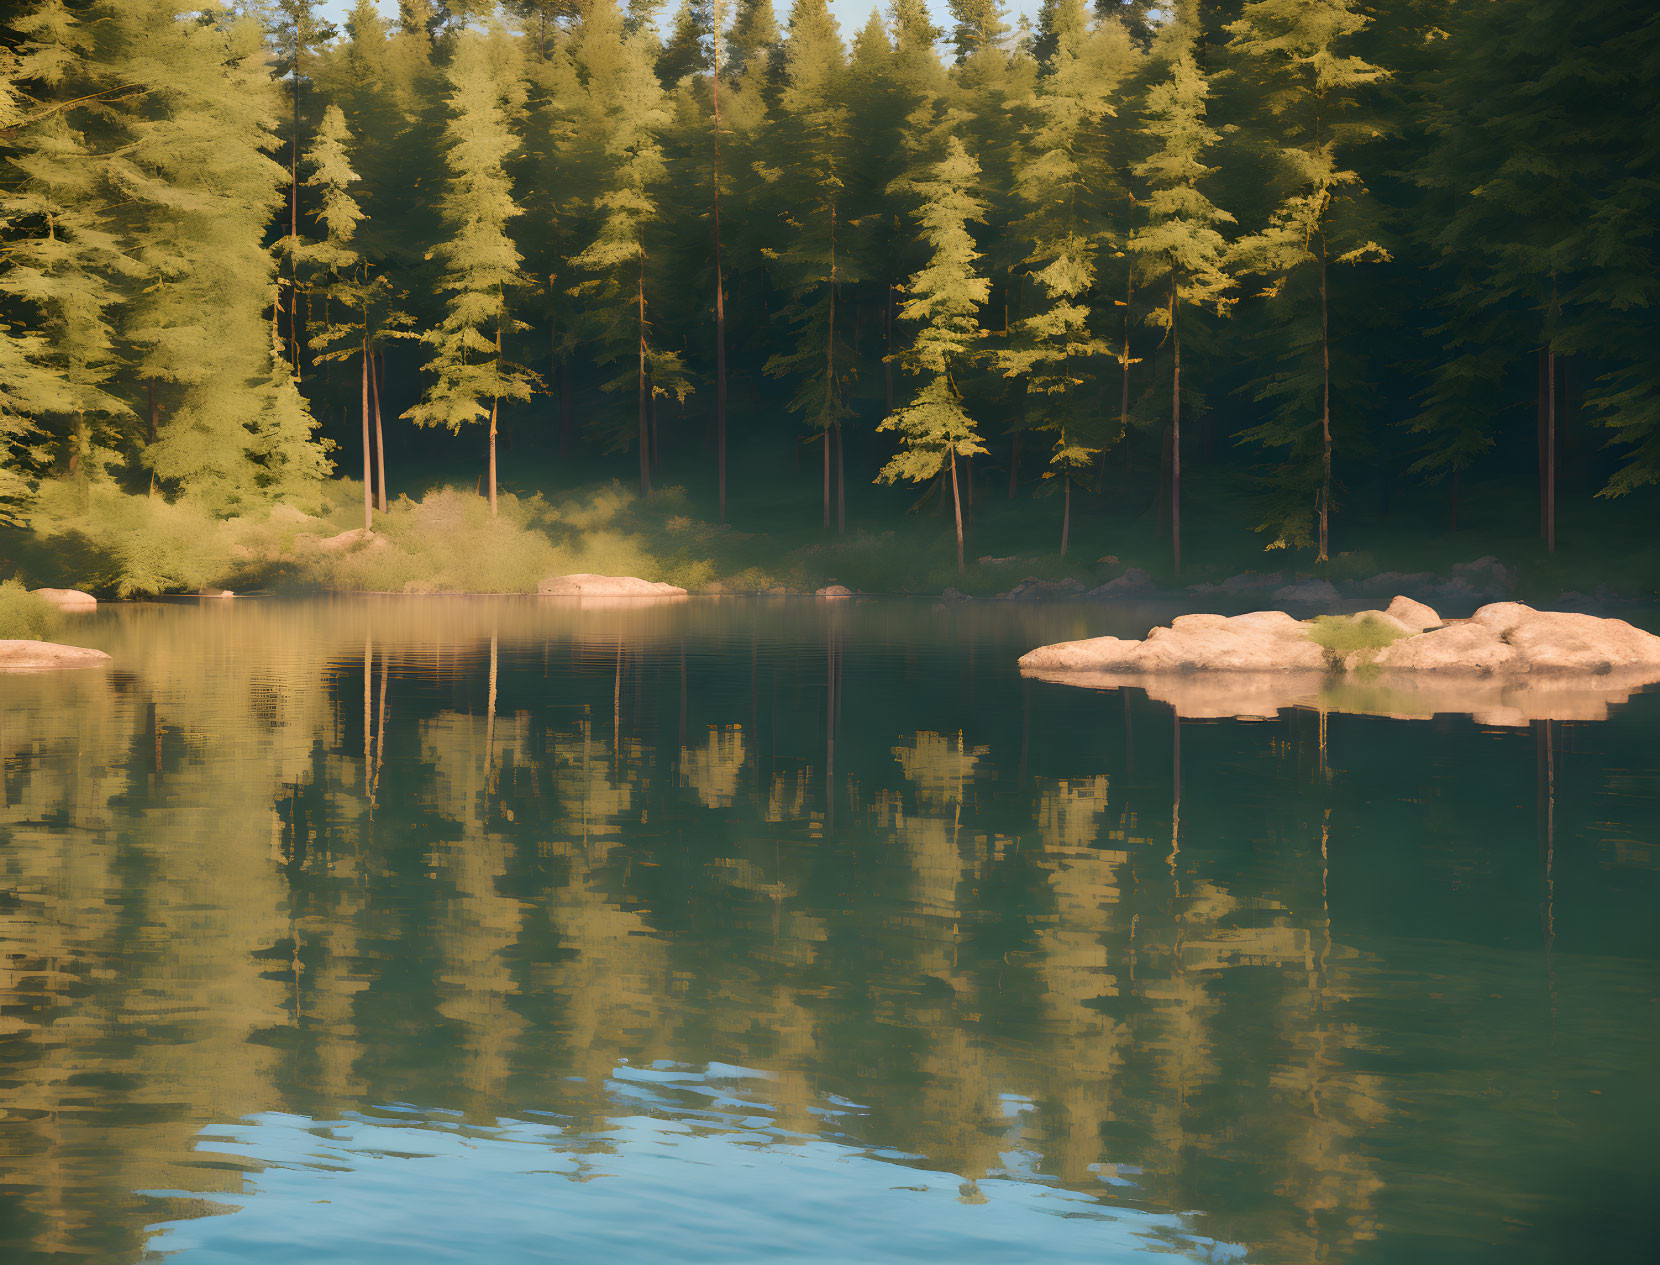 Lakeside view of the forest